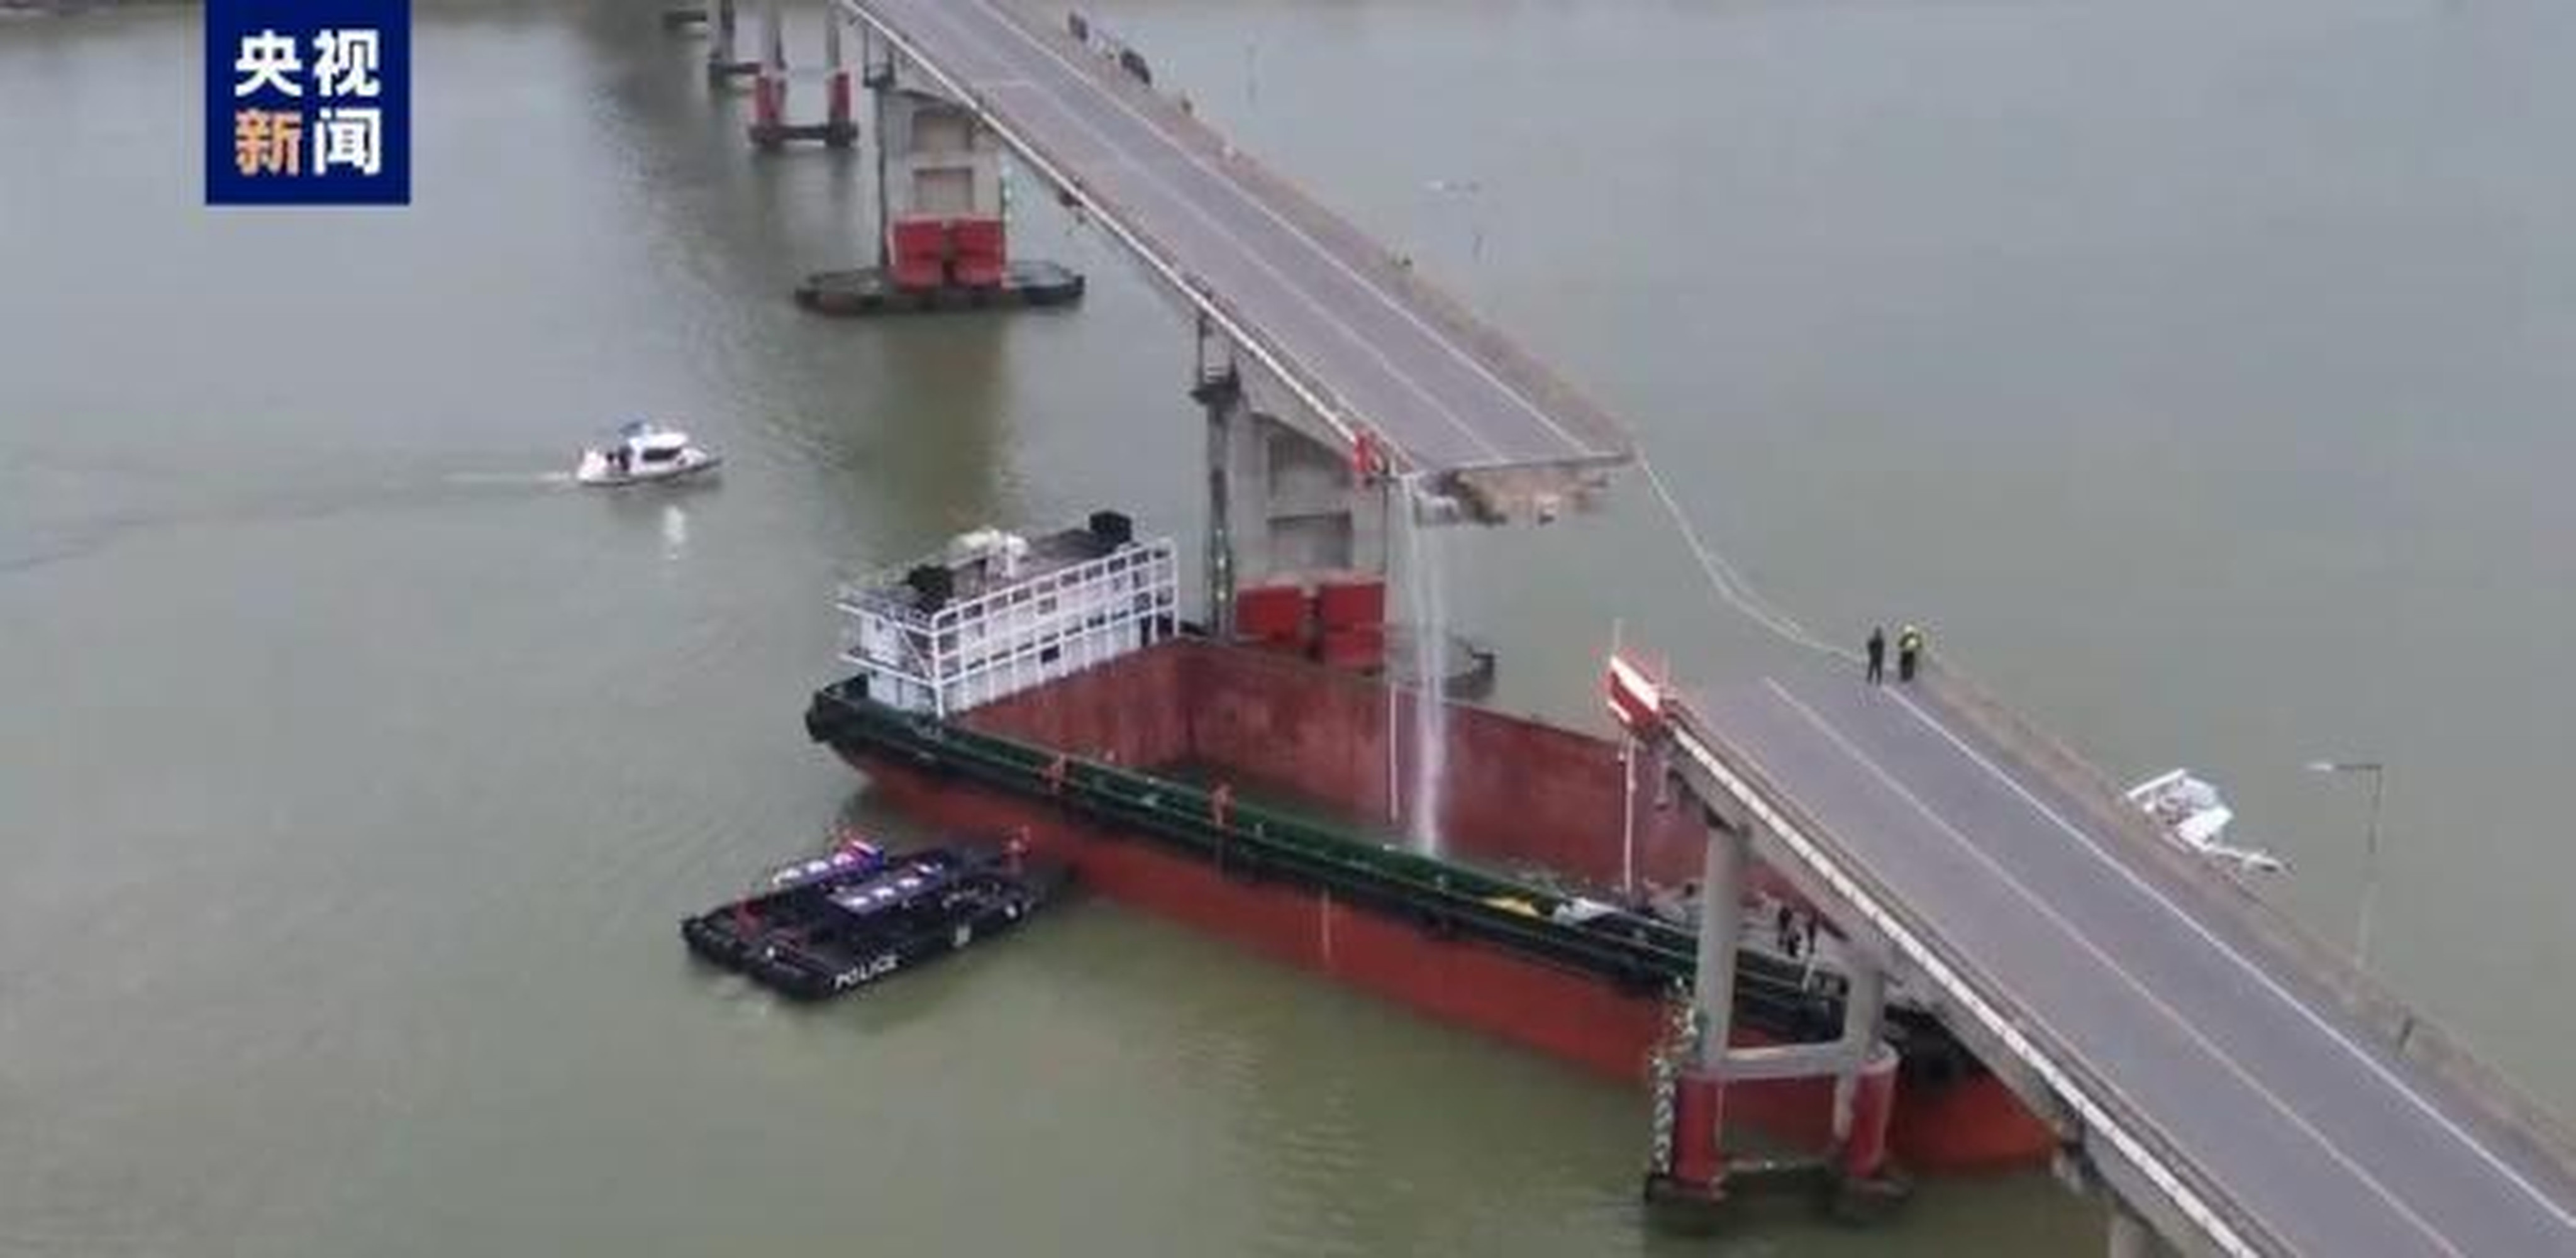 A ship has collided with a bridge in Guangzhou’s Nansha district in Guangdong province, southern China. Photo: CCTV